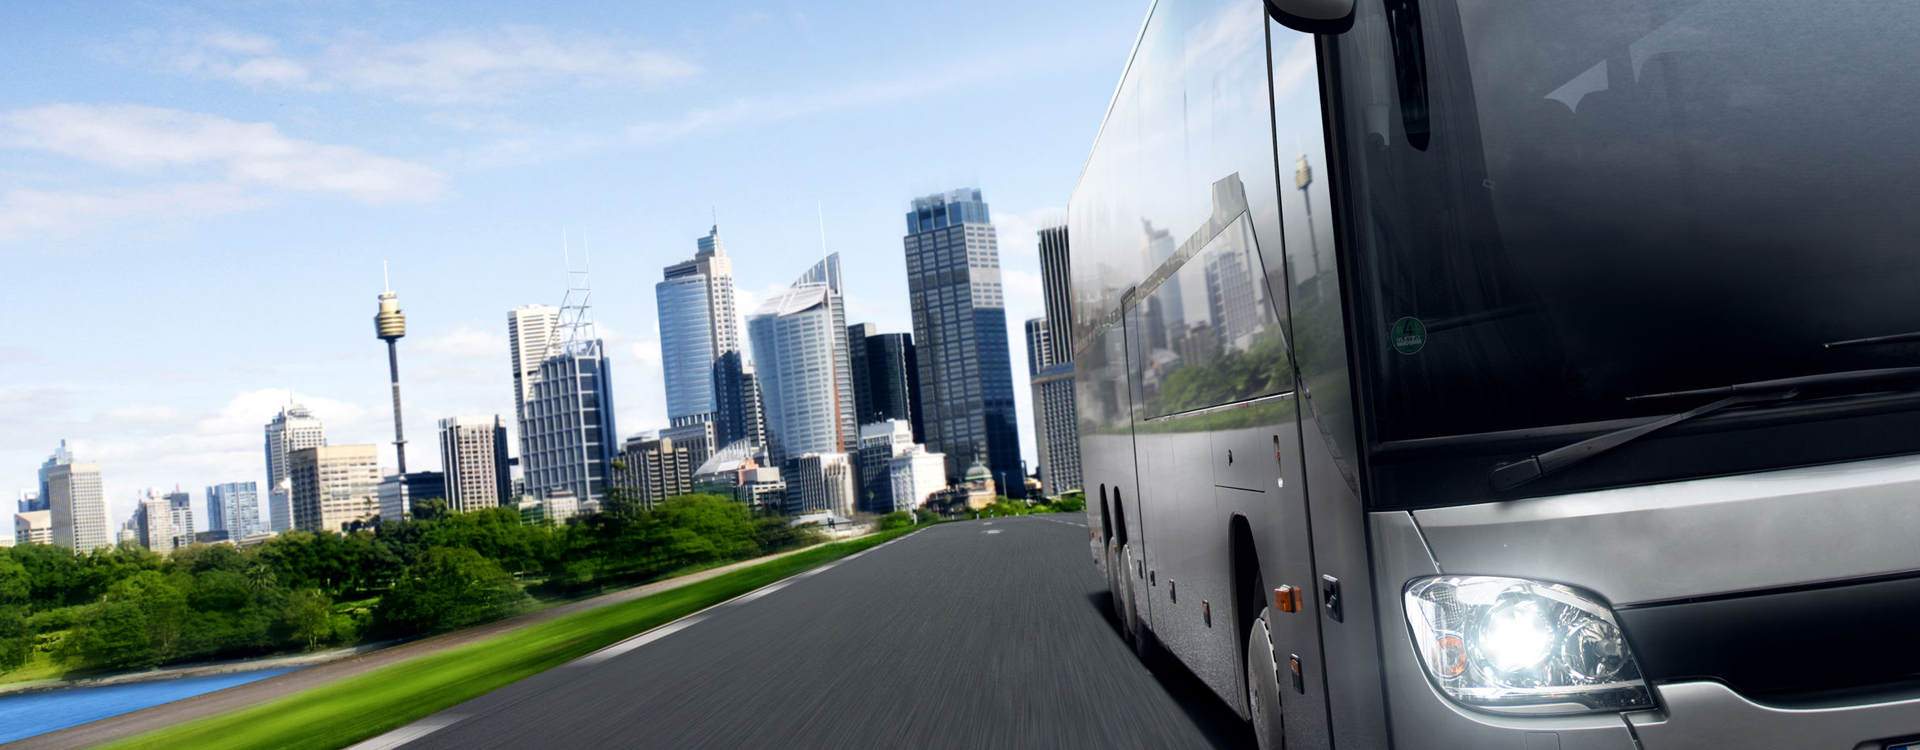 Top Ten Transportation Moves To Put Your City Wide Event On The Fast Track To Success